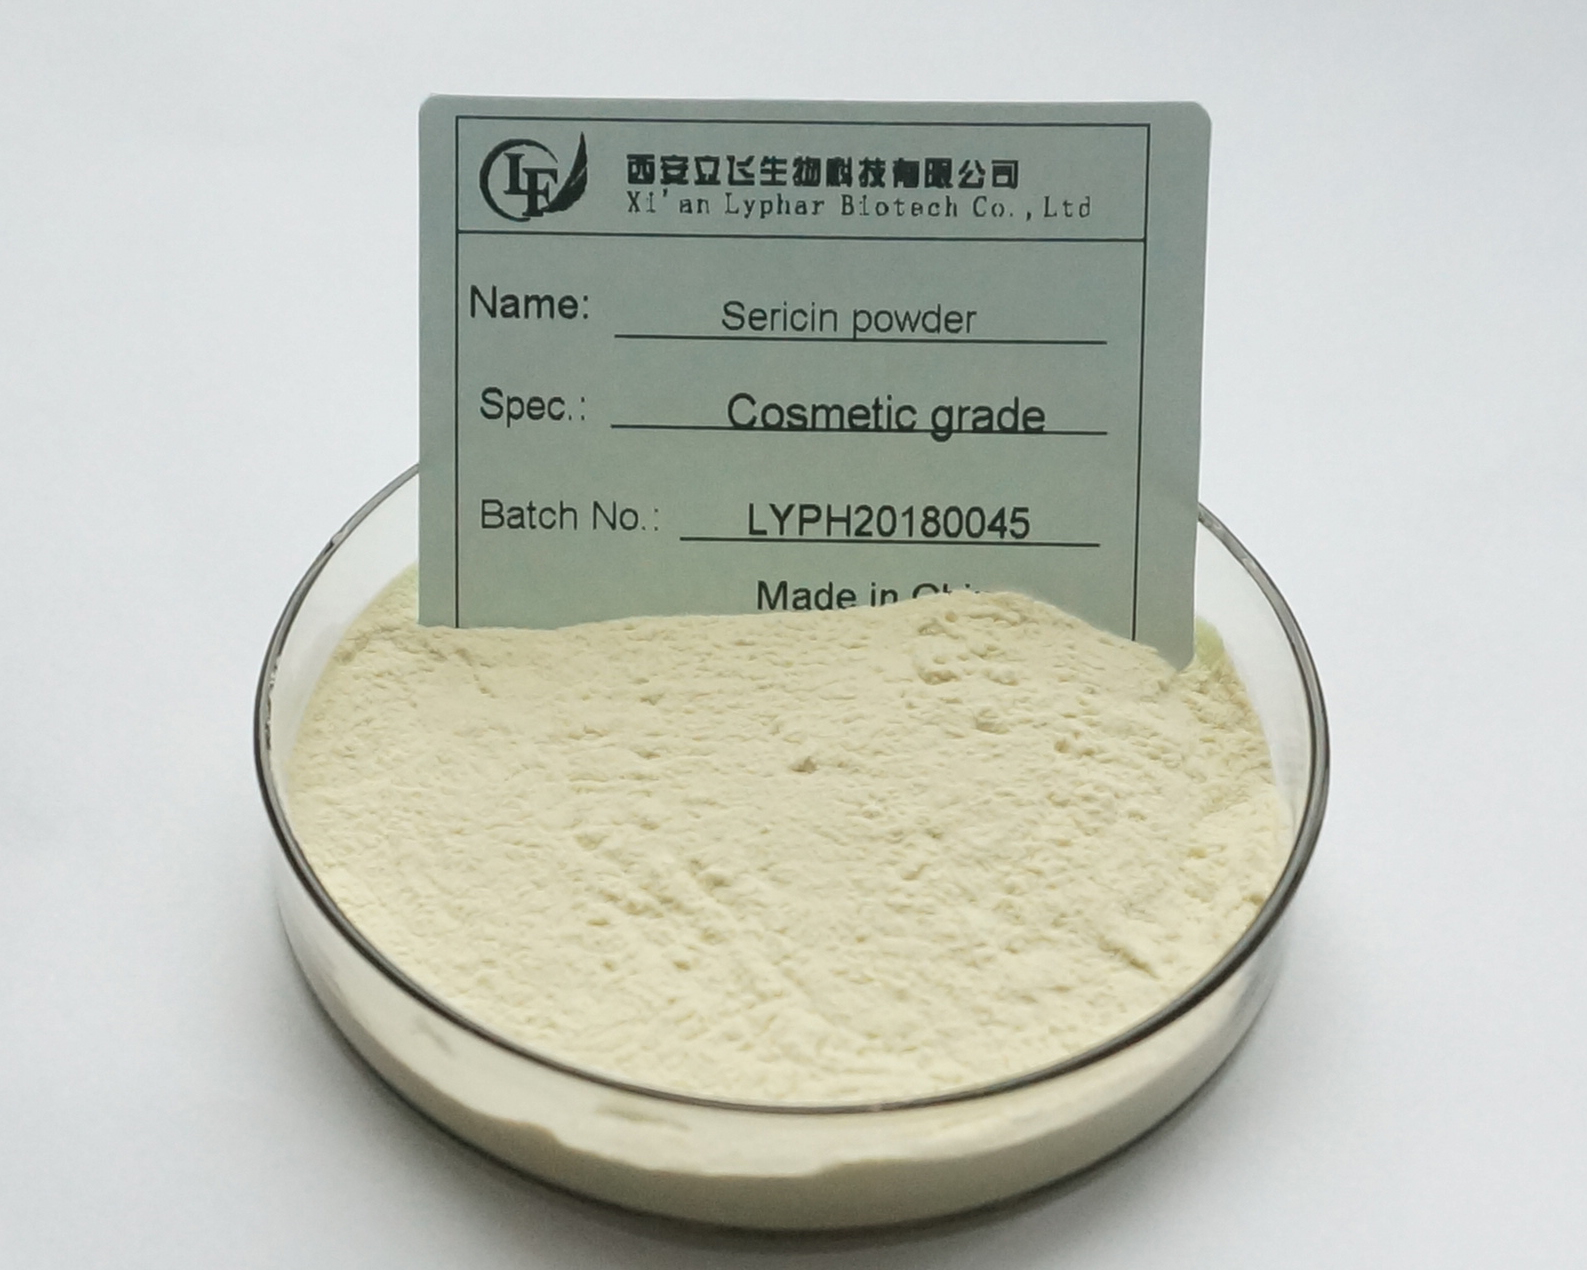 Chemical structure and physical properties of Sericin-Xi'an Lyphar Biotech Co., Ltd